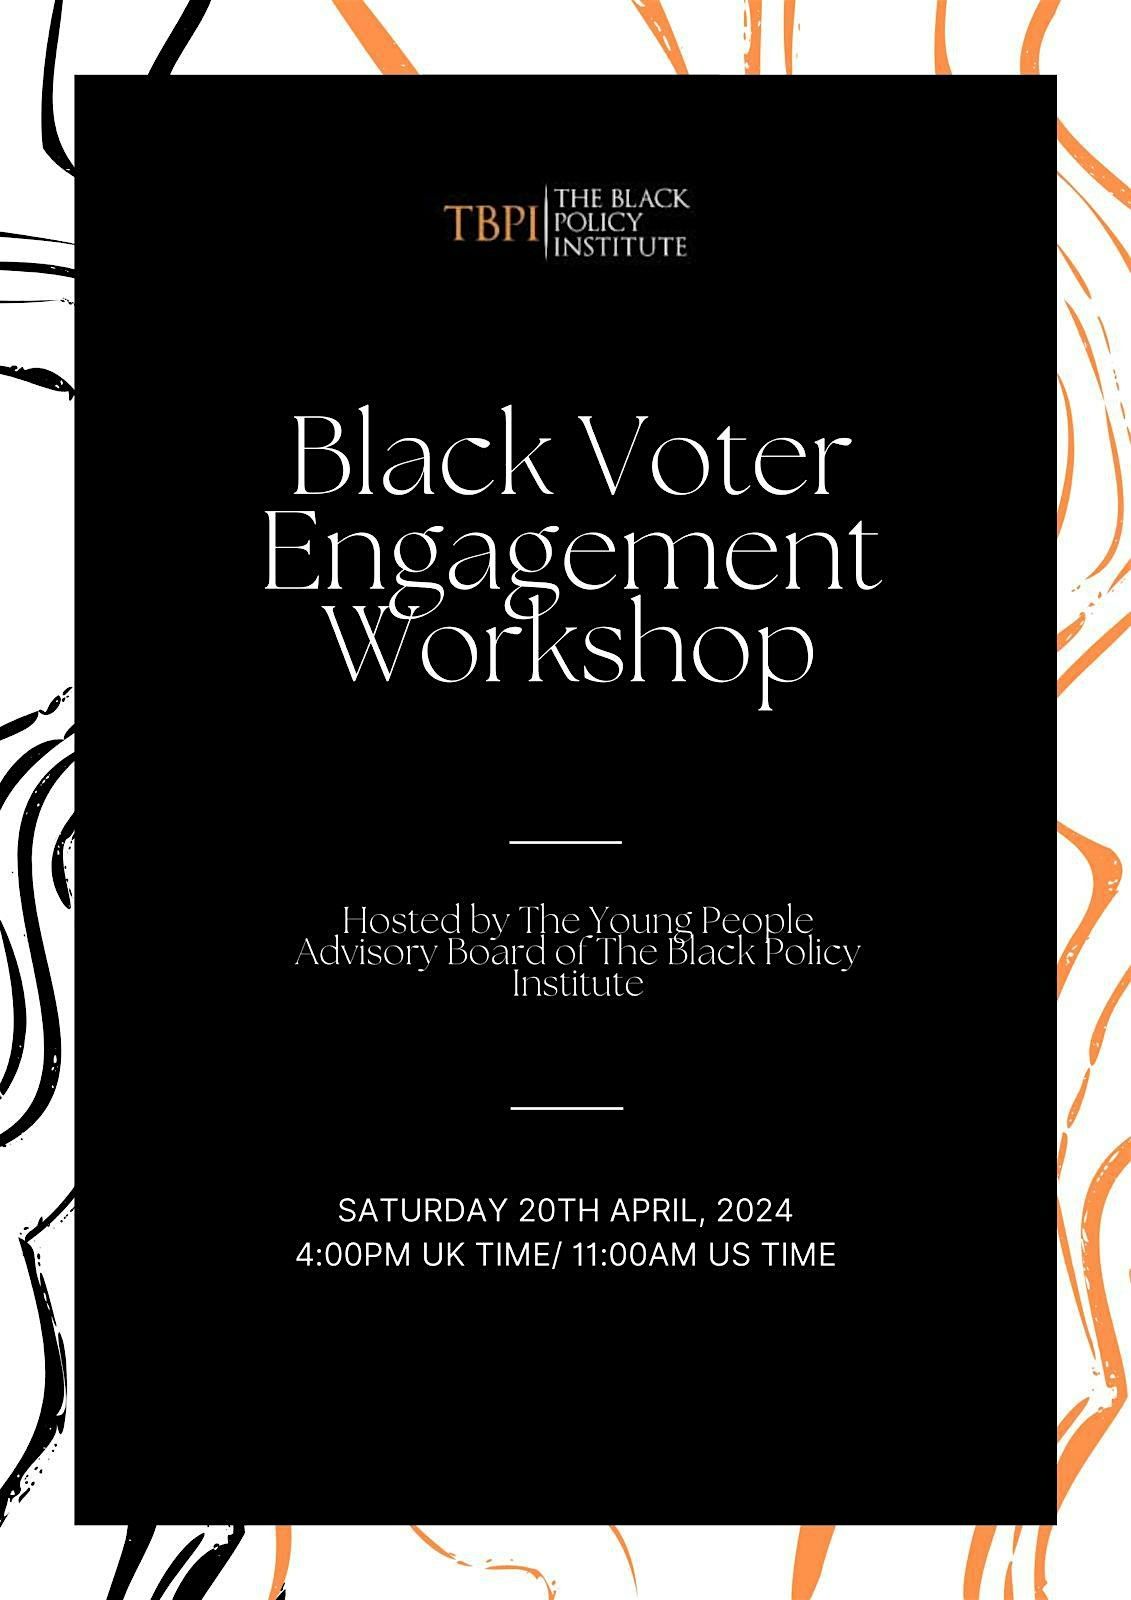 Black Voter Engagement Workshop: Hosted by The Black Policy Institute